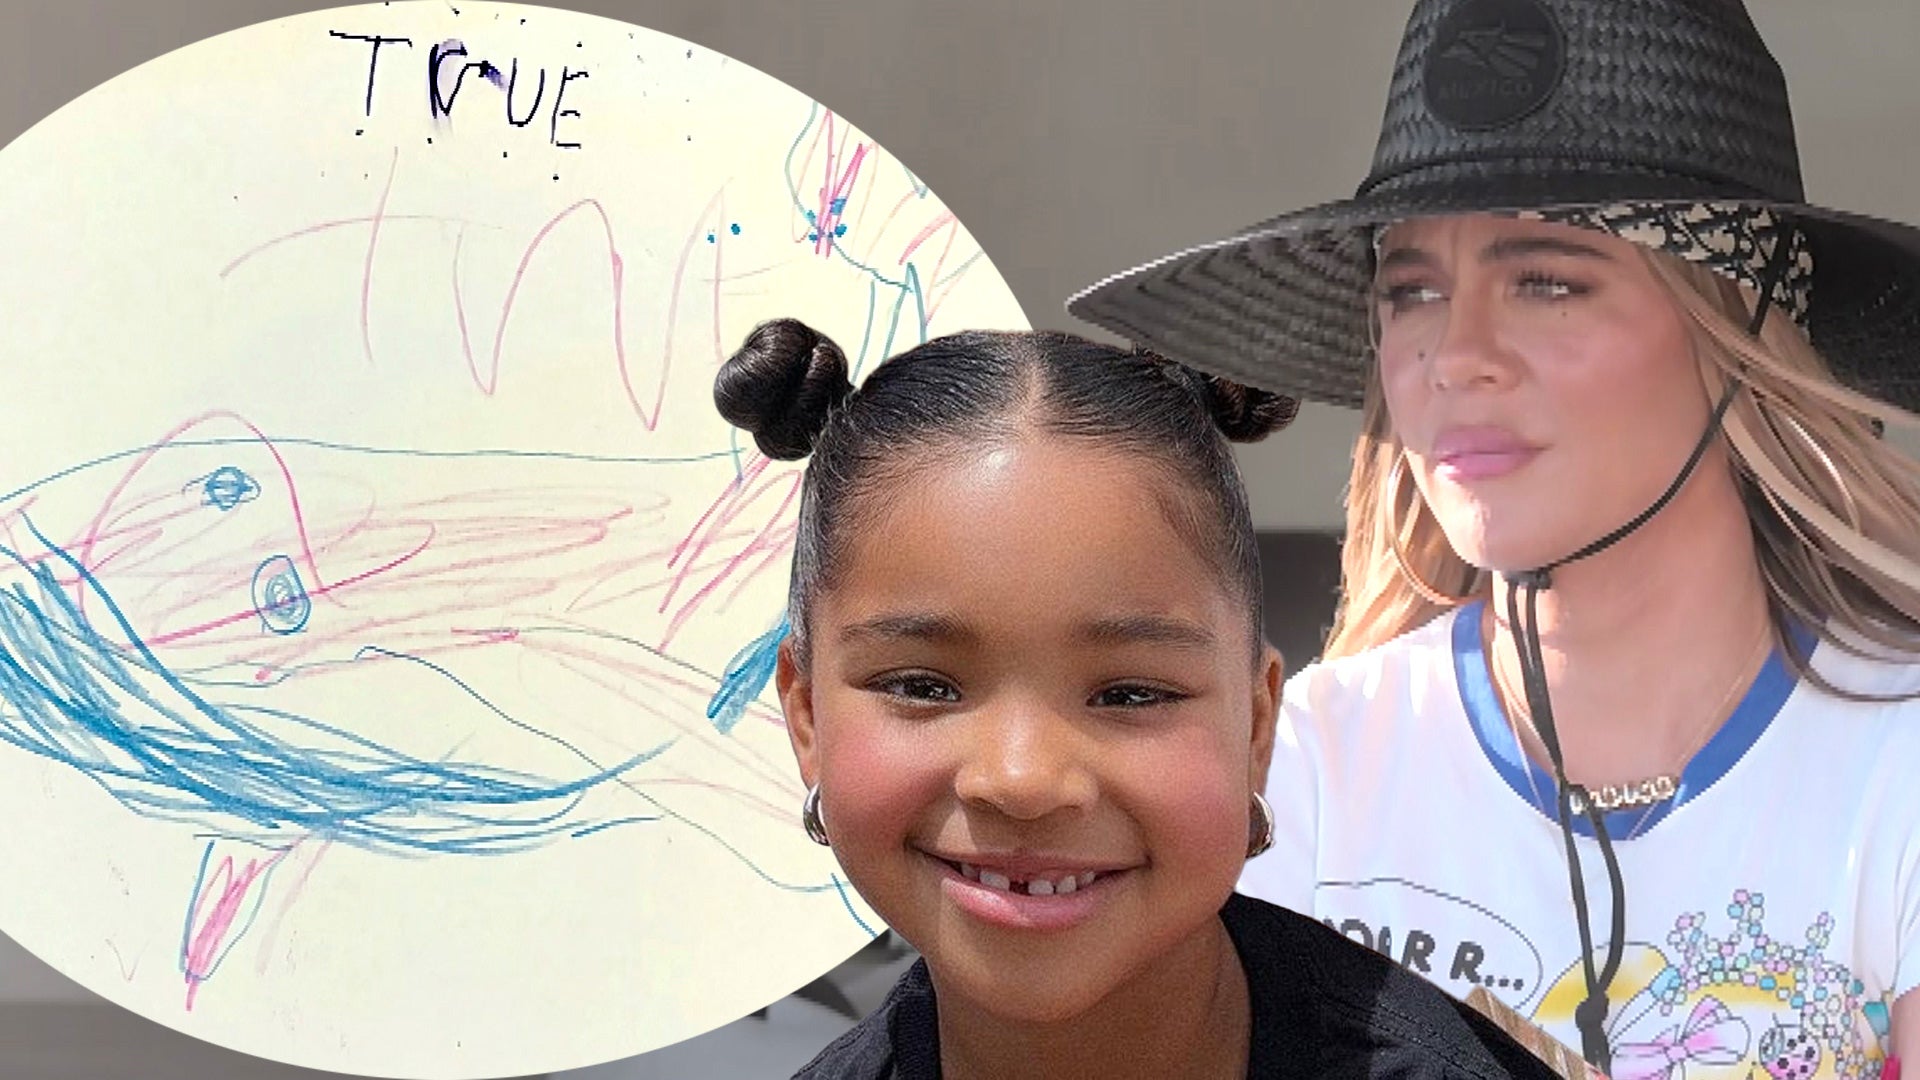 Khloé Kardashian’s Daughter True Trolls Her Over Her Fear of Whales